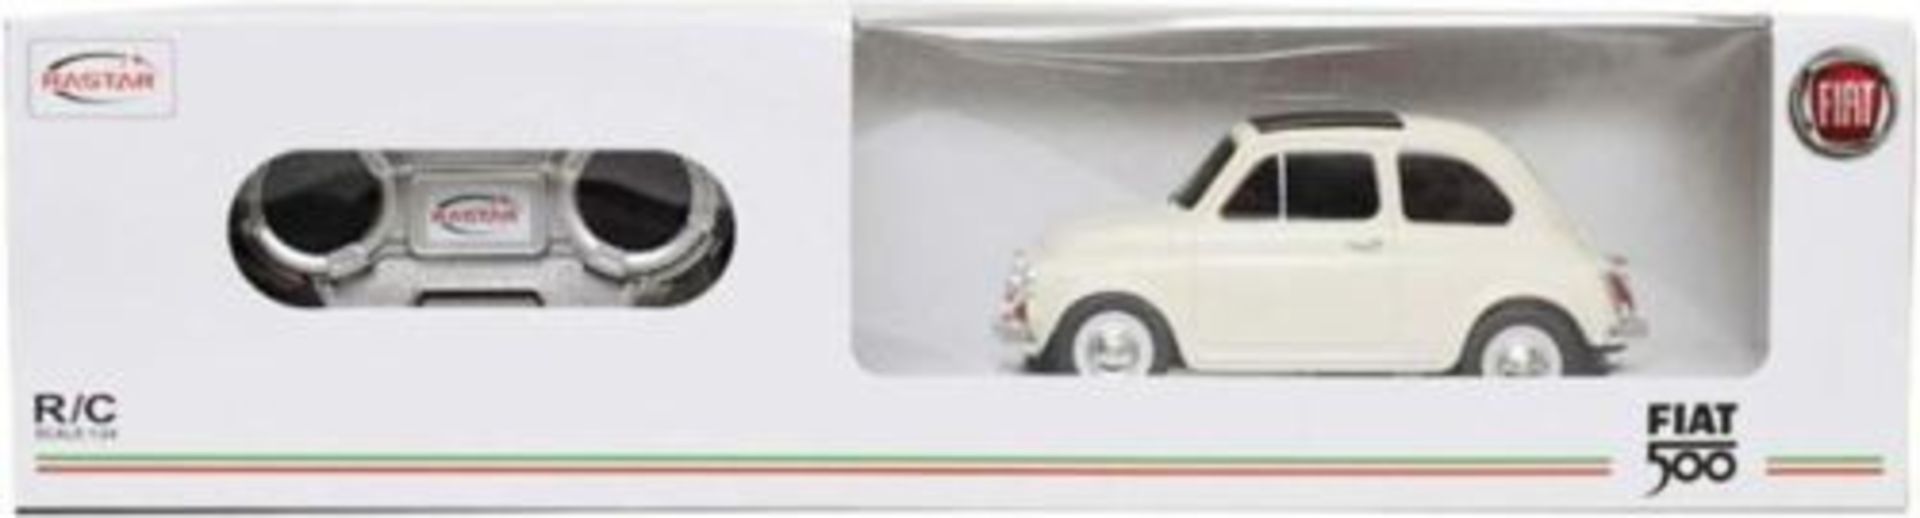 V *TRADE QTY* Brand New 1:24 Scale Radio Control Fiat 500 - Fully Licensed X 8 YOUR BID PRICE TO